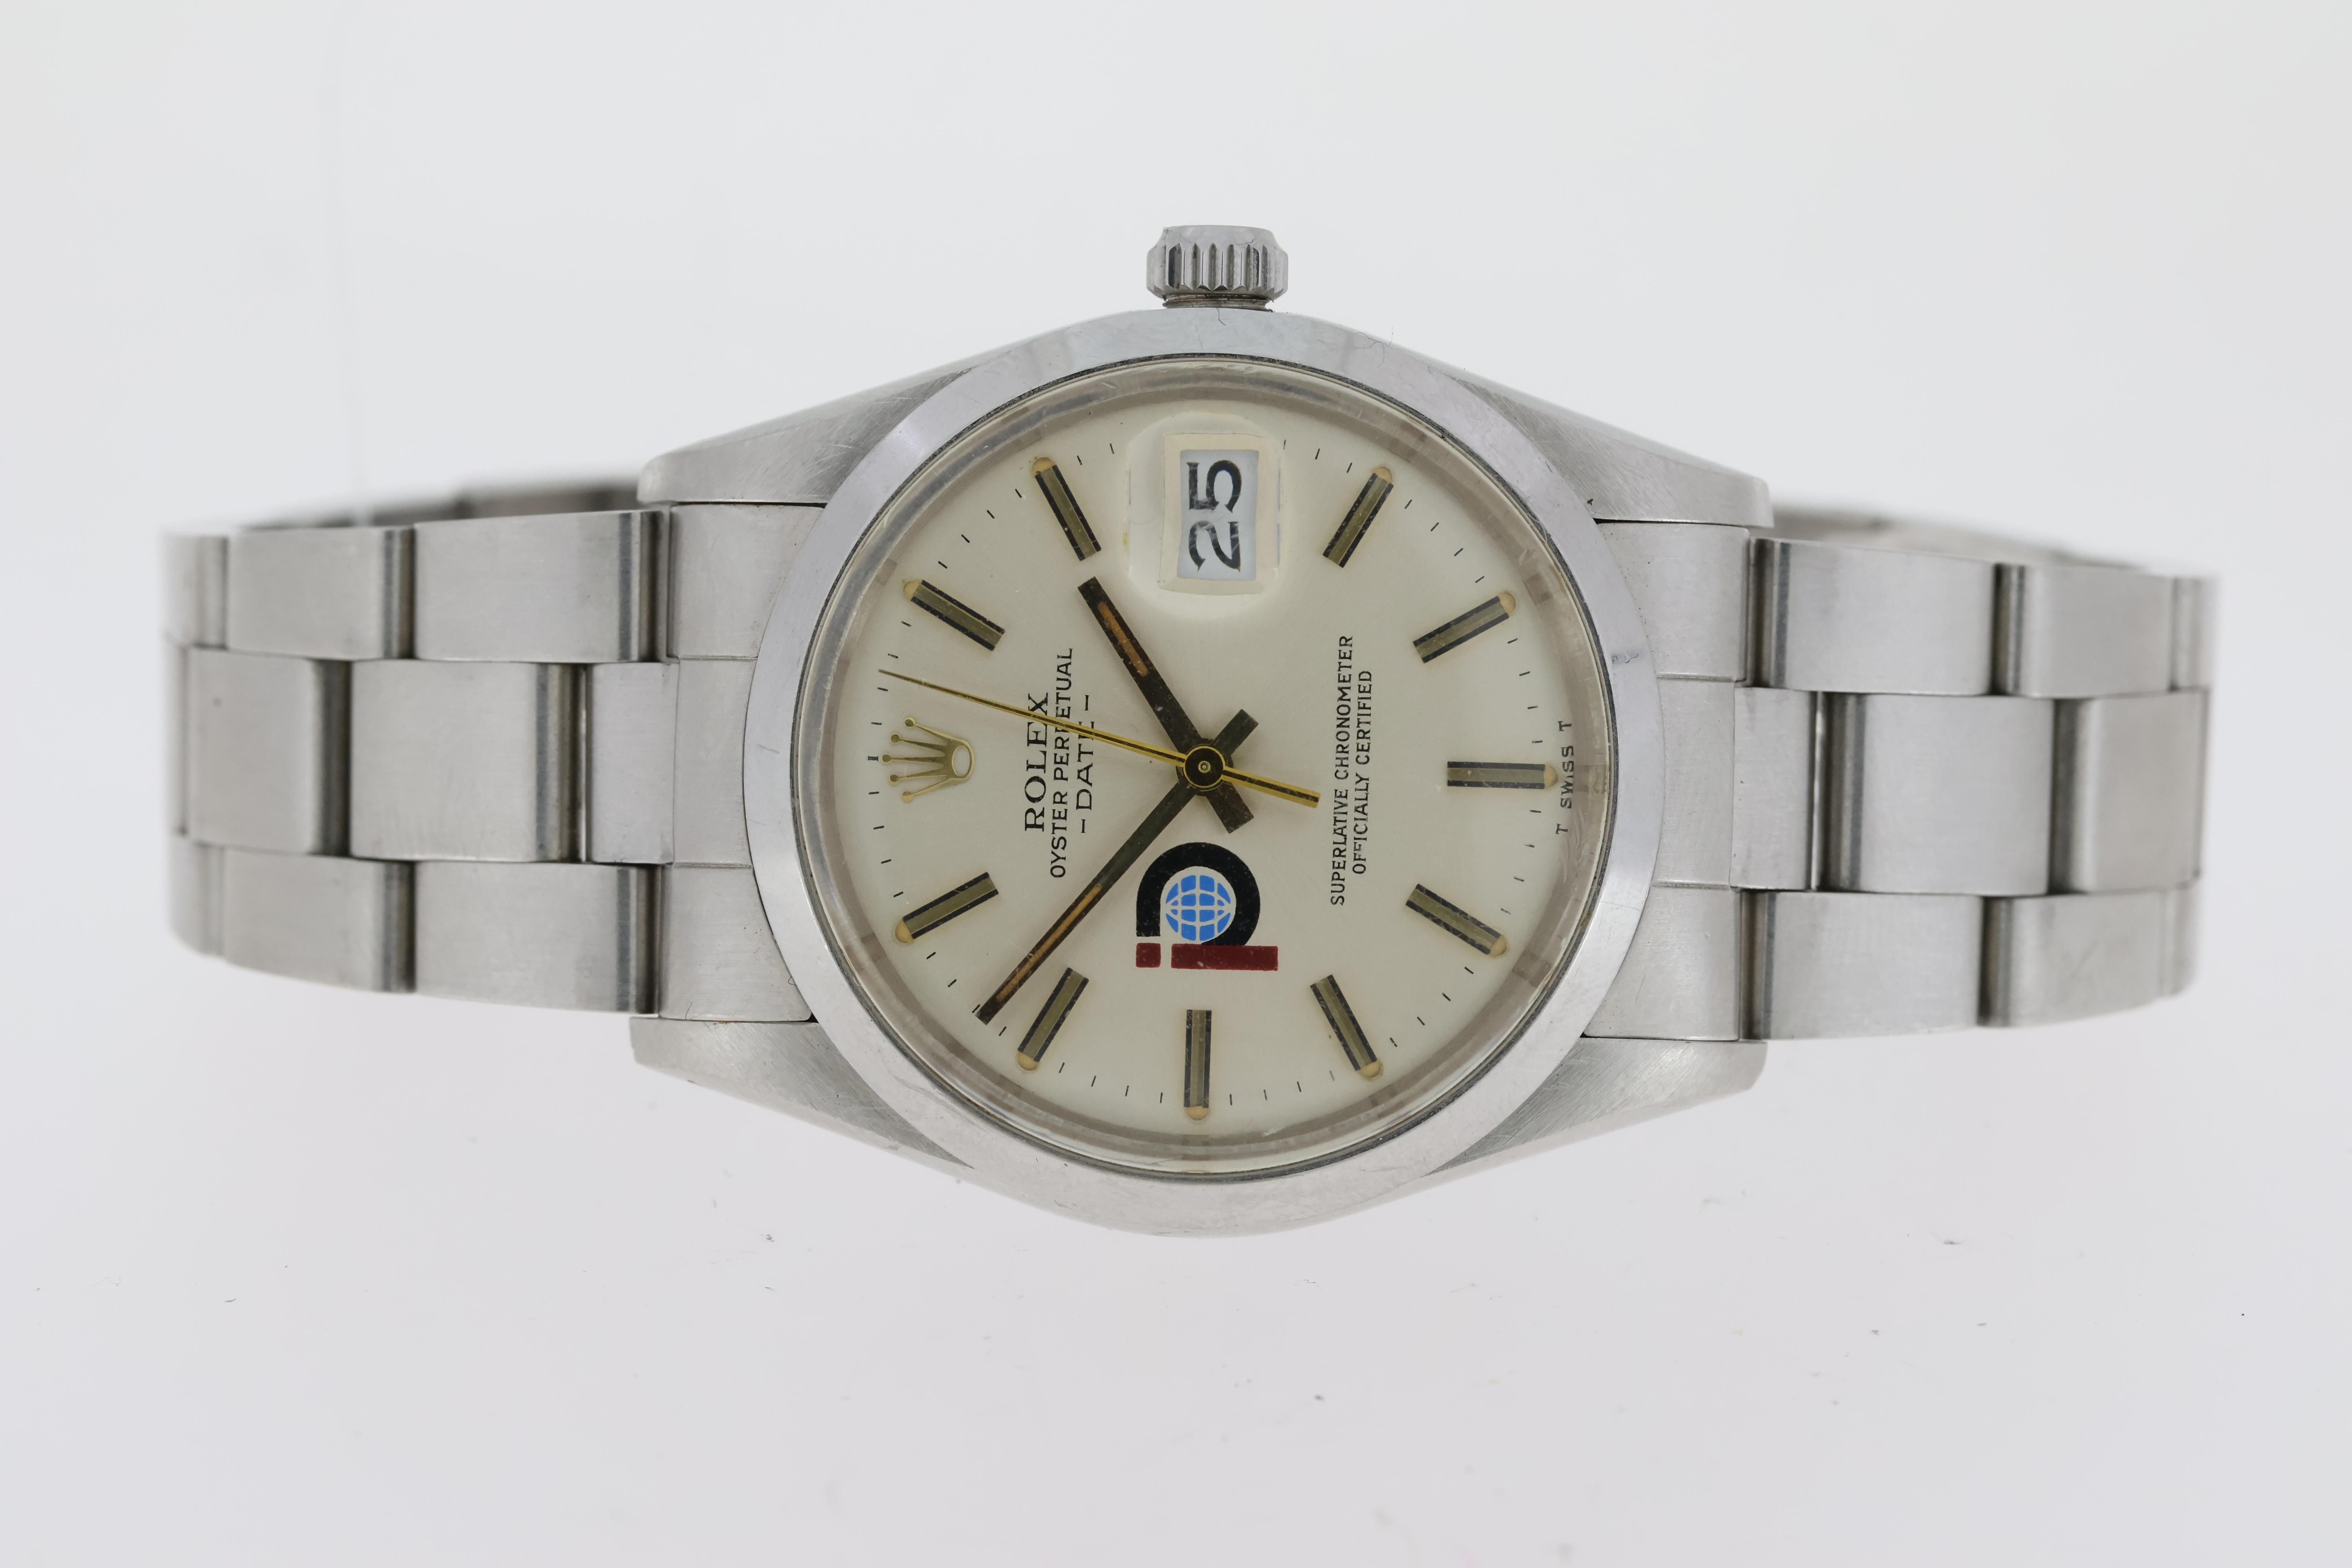 ROLEX OYSTER PERPETUAL DATE POOL INTAIRDRILL WATCH REFERENCE 15000 WITH BOX